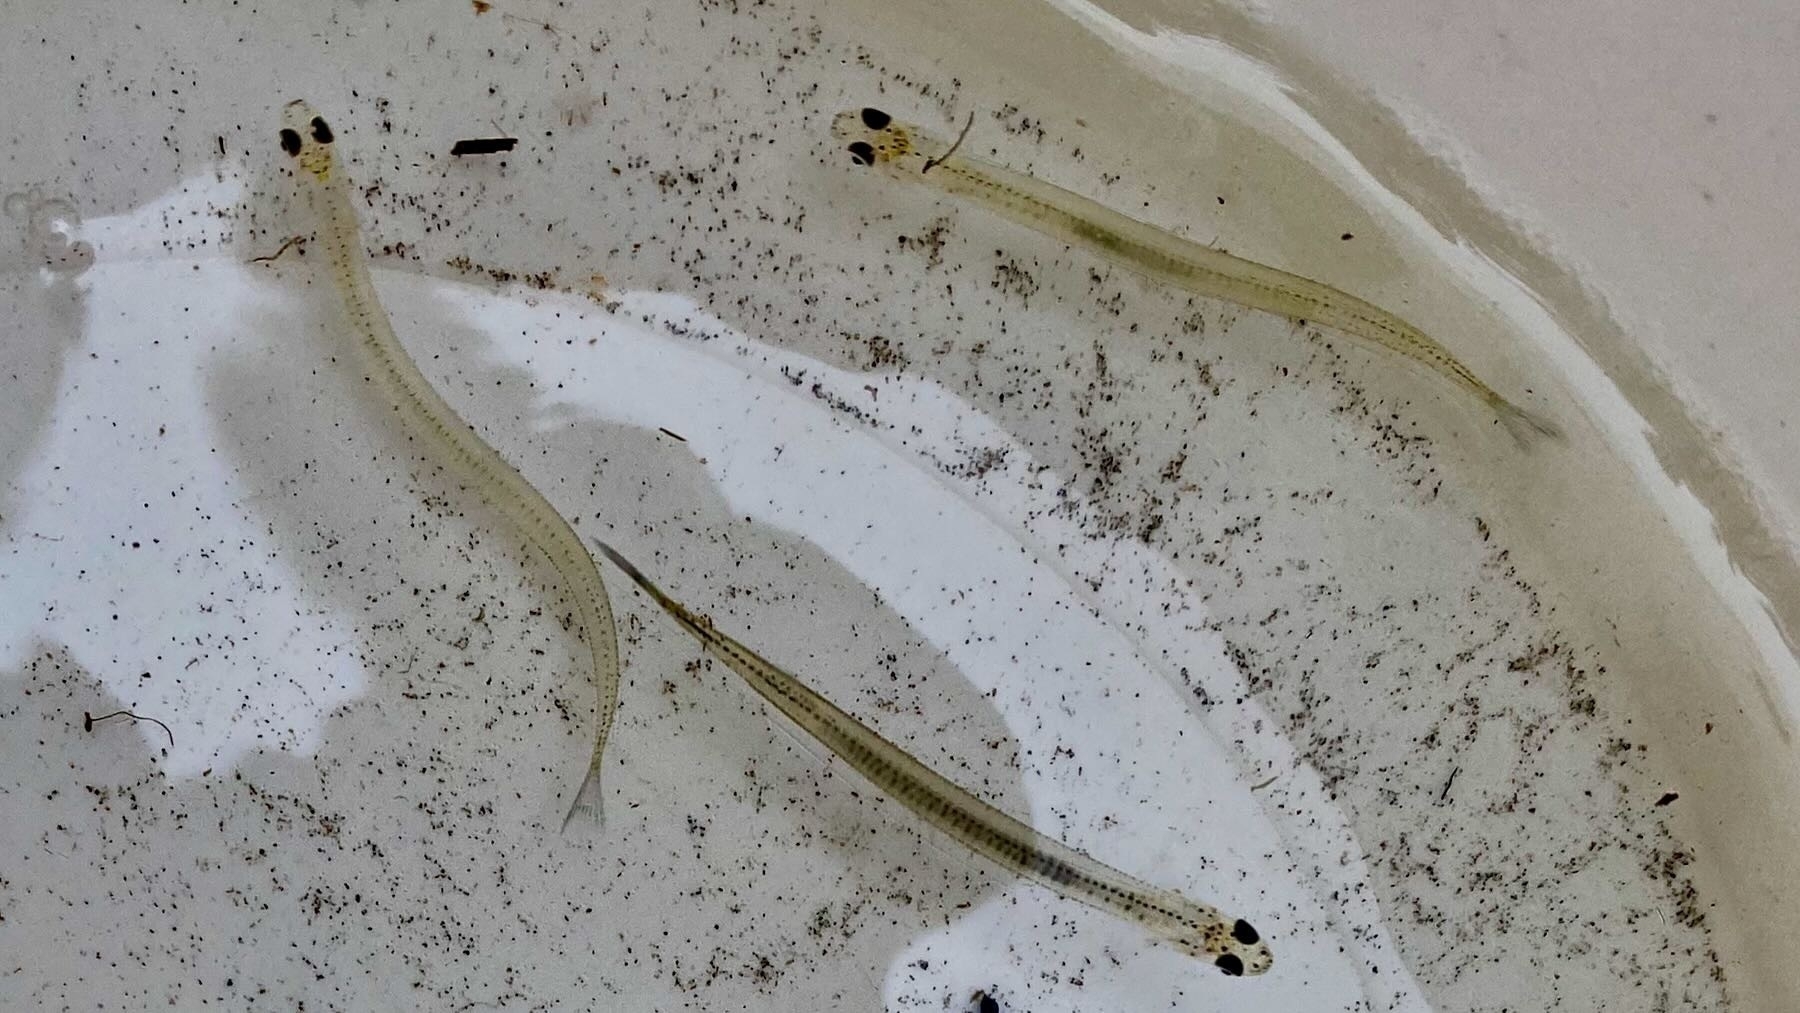 Closeup: Long thin transparent creatures with prominent black eyes, swimming in a bucket of water. 